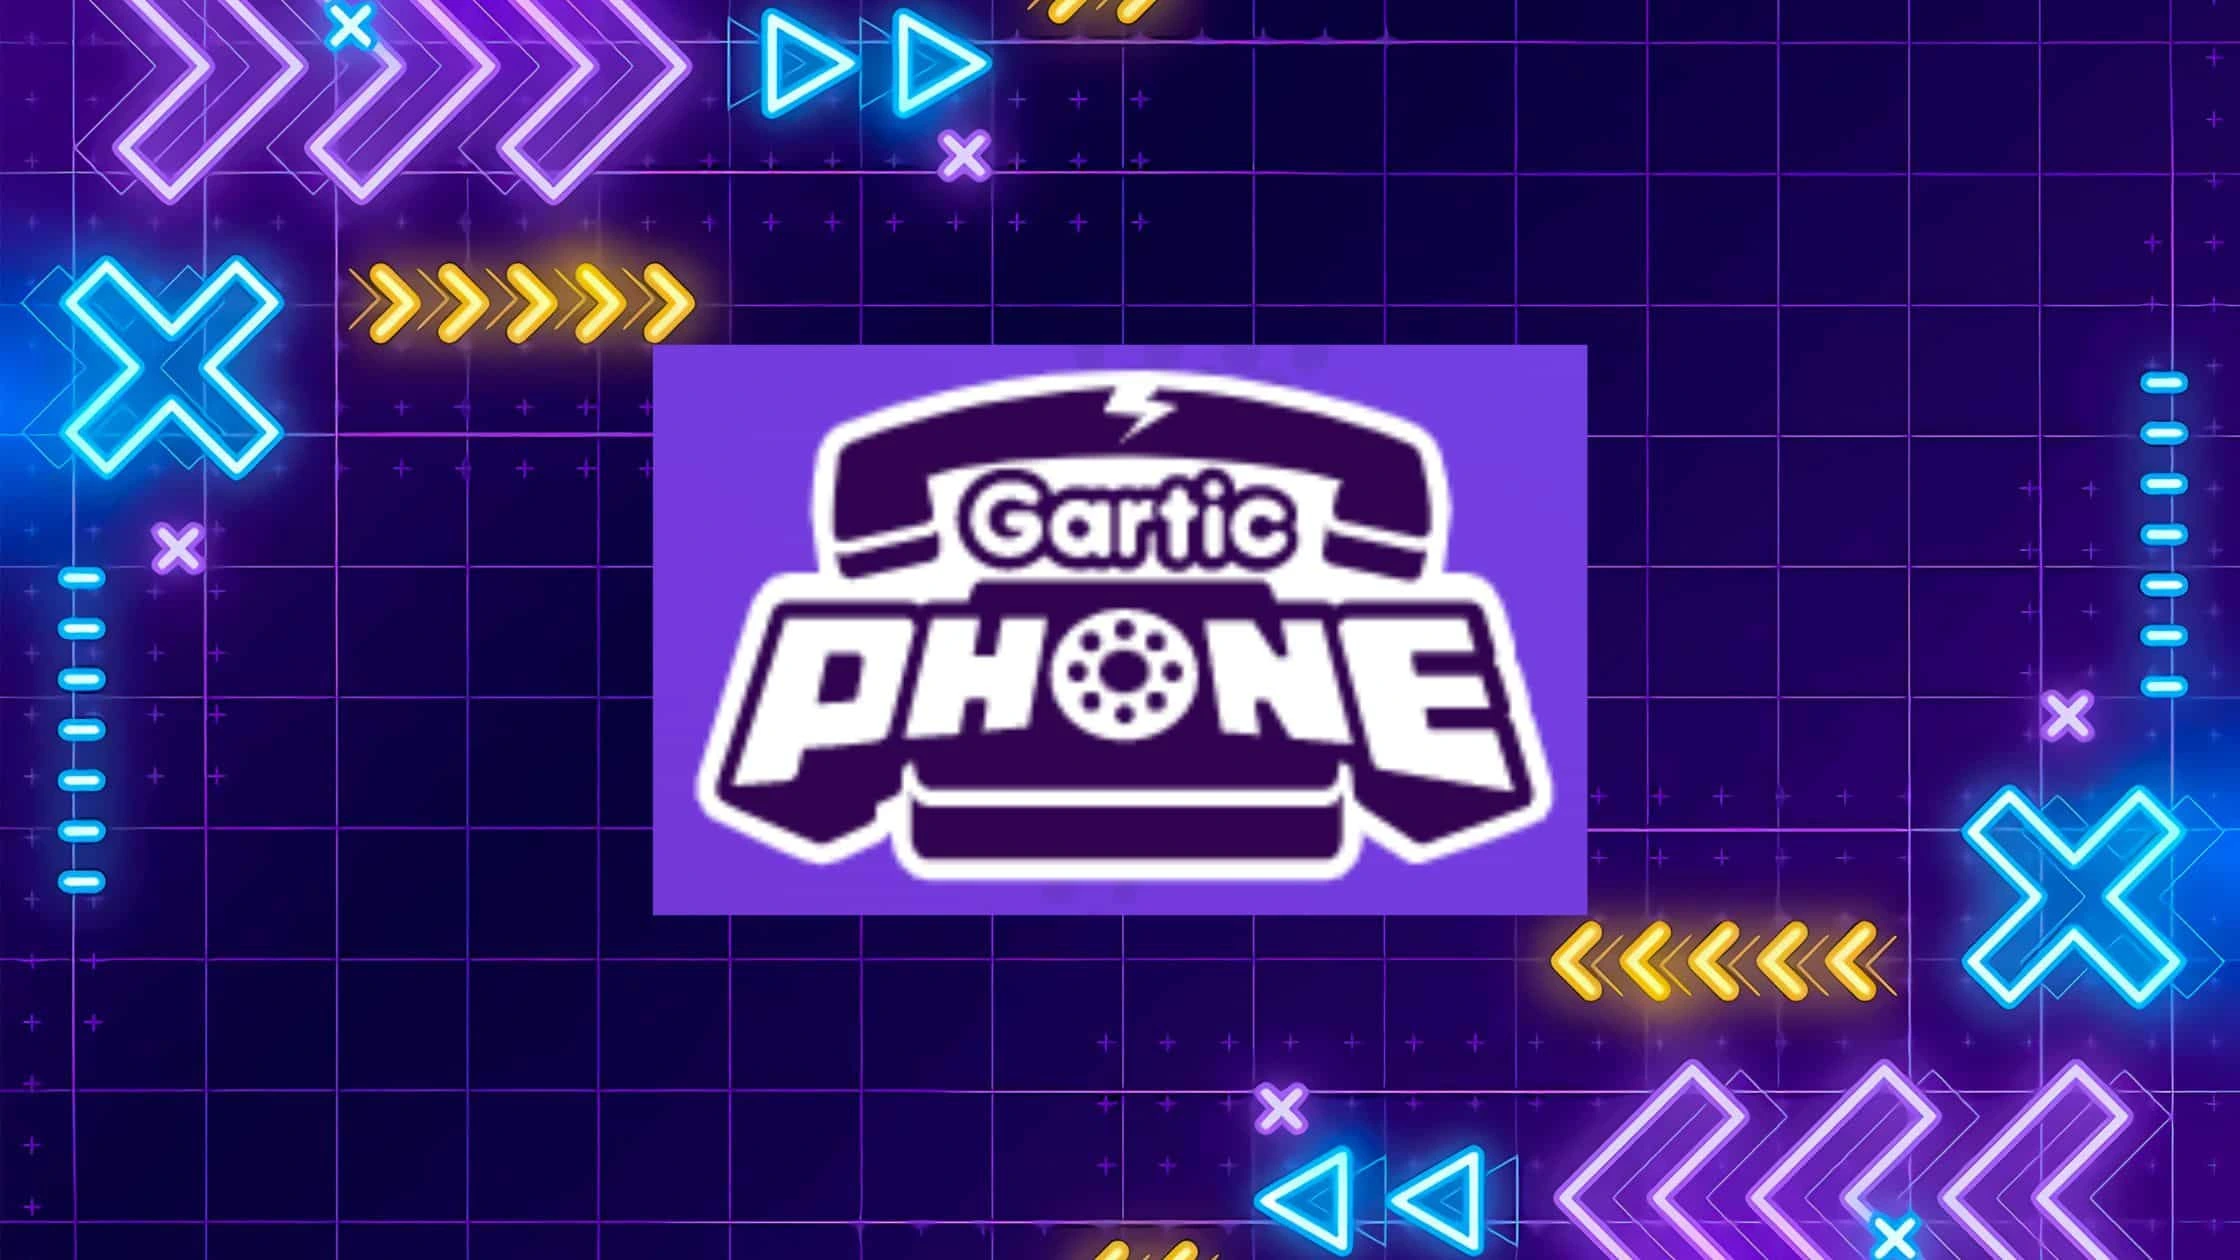 What is gartic phone game?